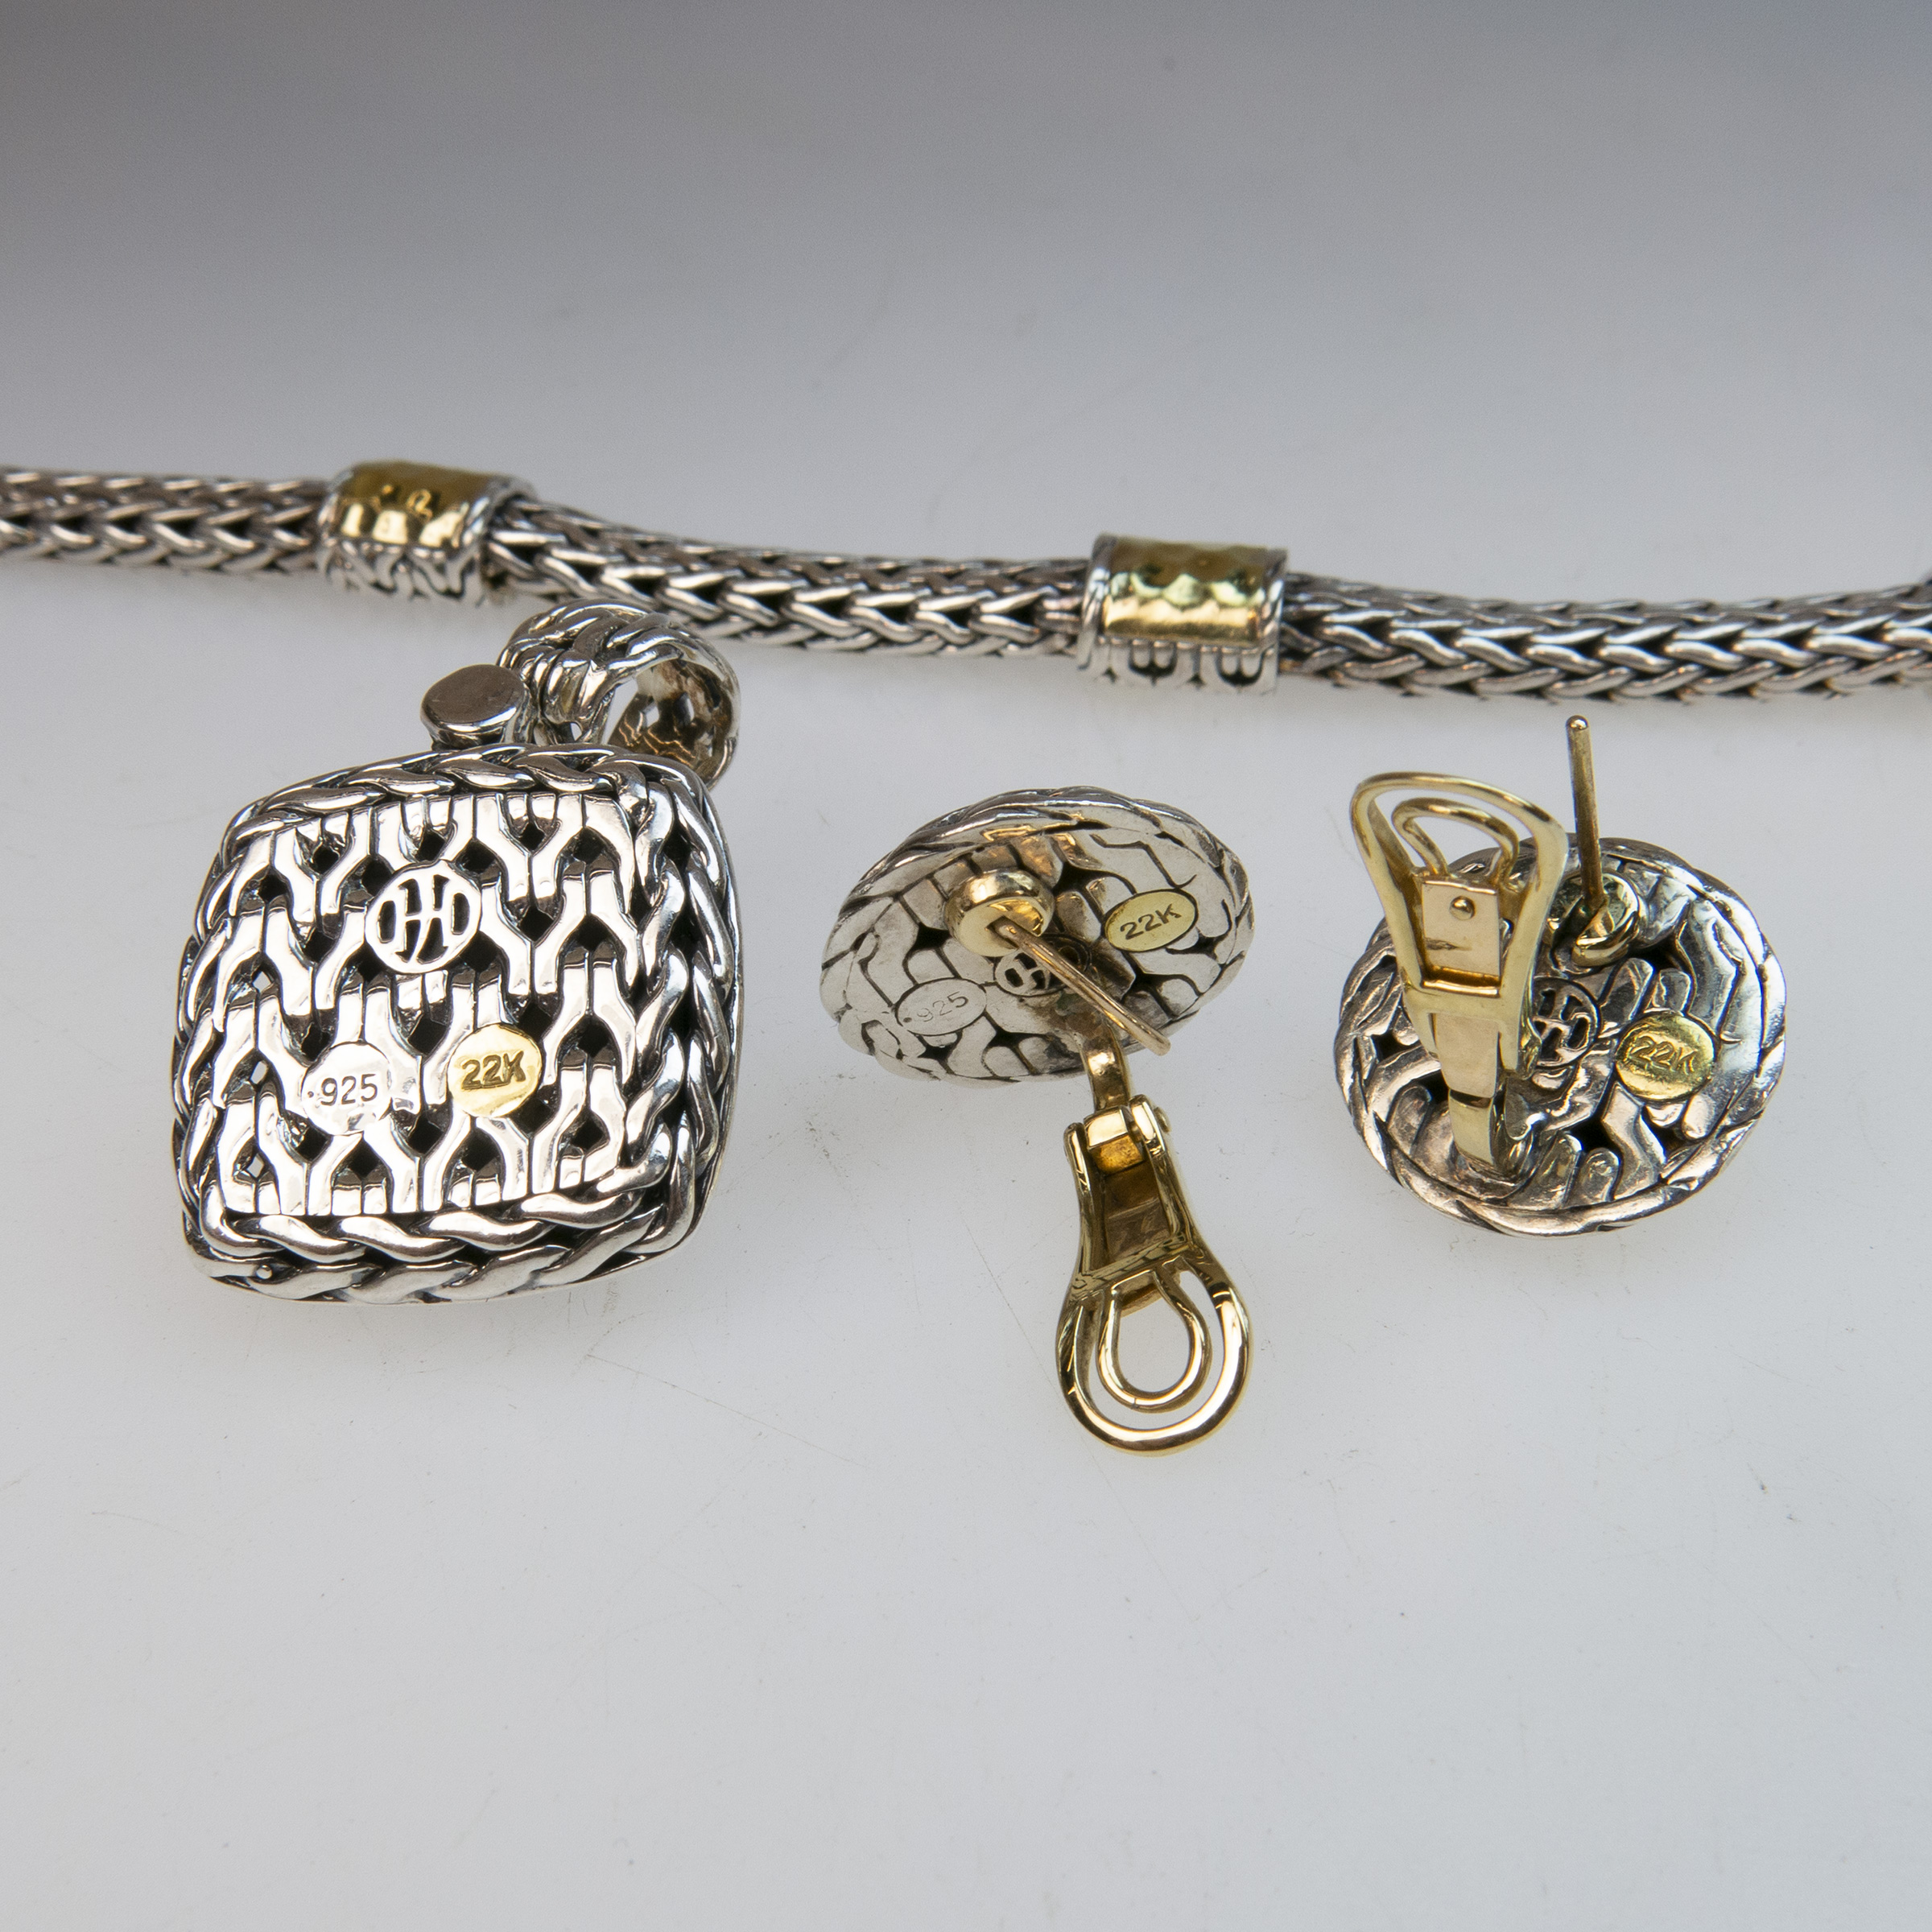 Four Piece John Hardy Sterling Silver And 22k Yellow Gold Jewellery Suite